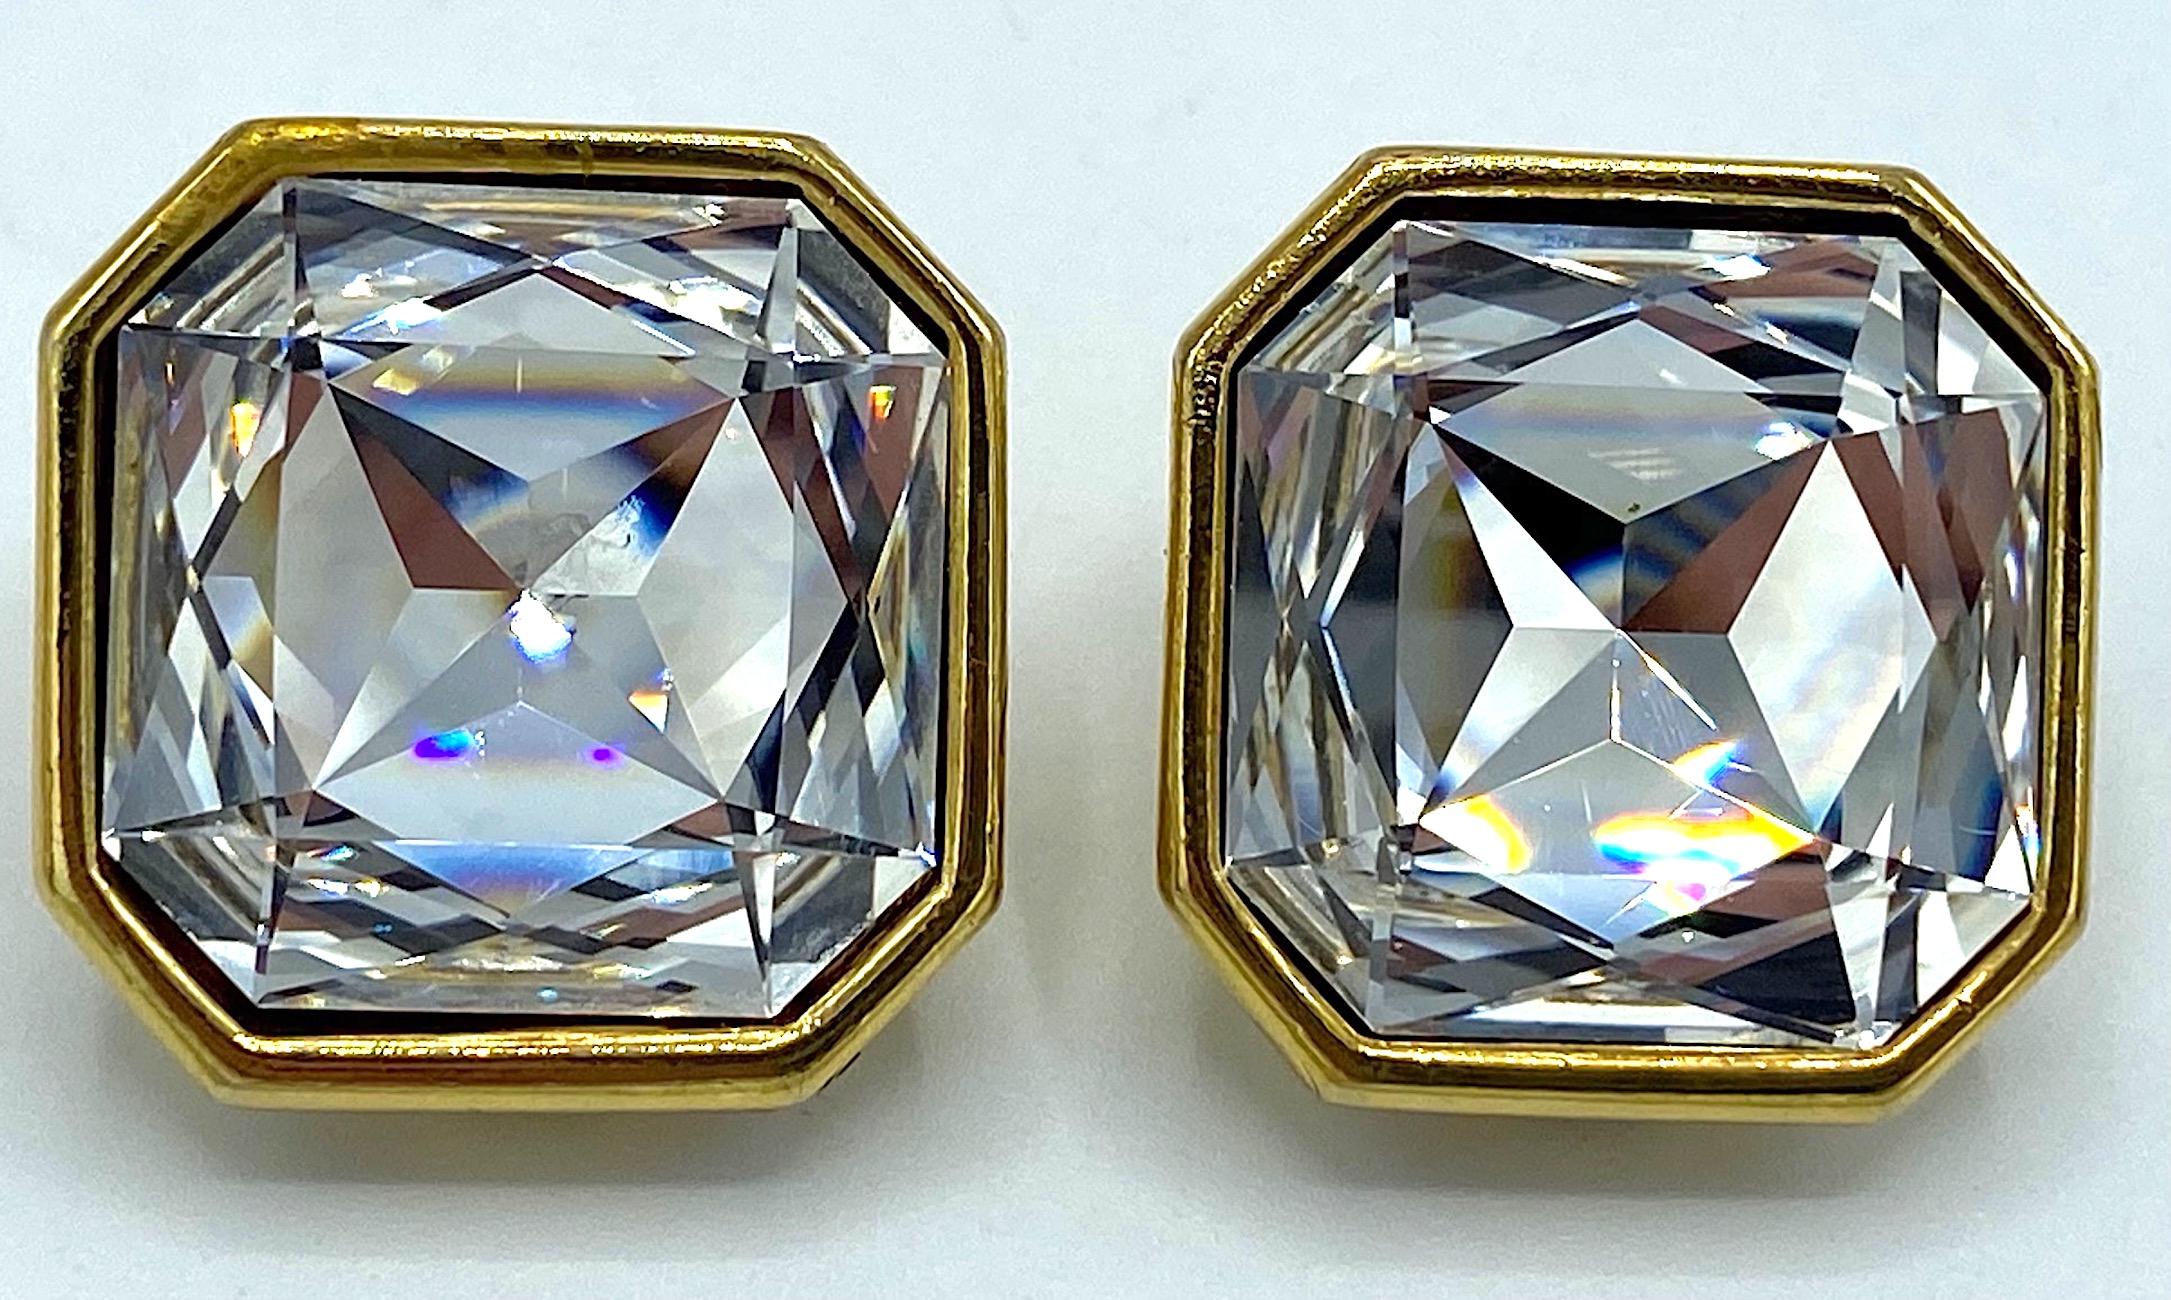 An elegant pair of large 1 inch square faceted crystal rhinestone button earrings by French fashion jewelry company Poggi. Each stone is set into an 18K gold plate mounting with a clip back. The back of each earring has an oval plaque inscribed